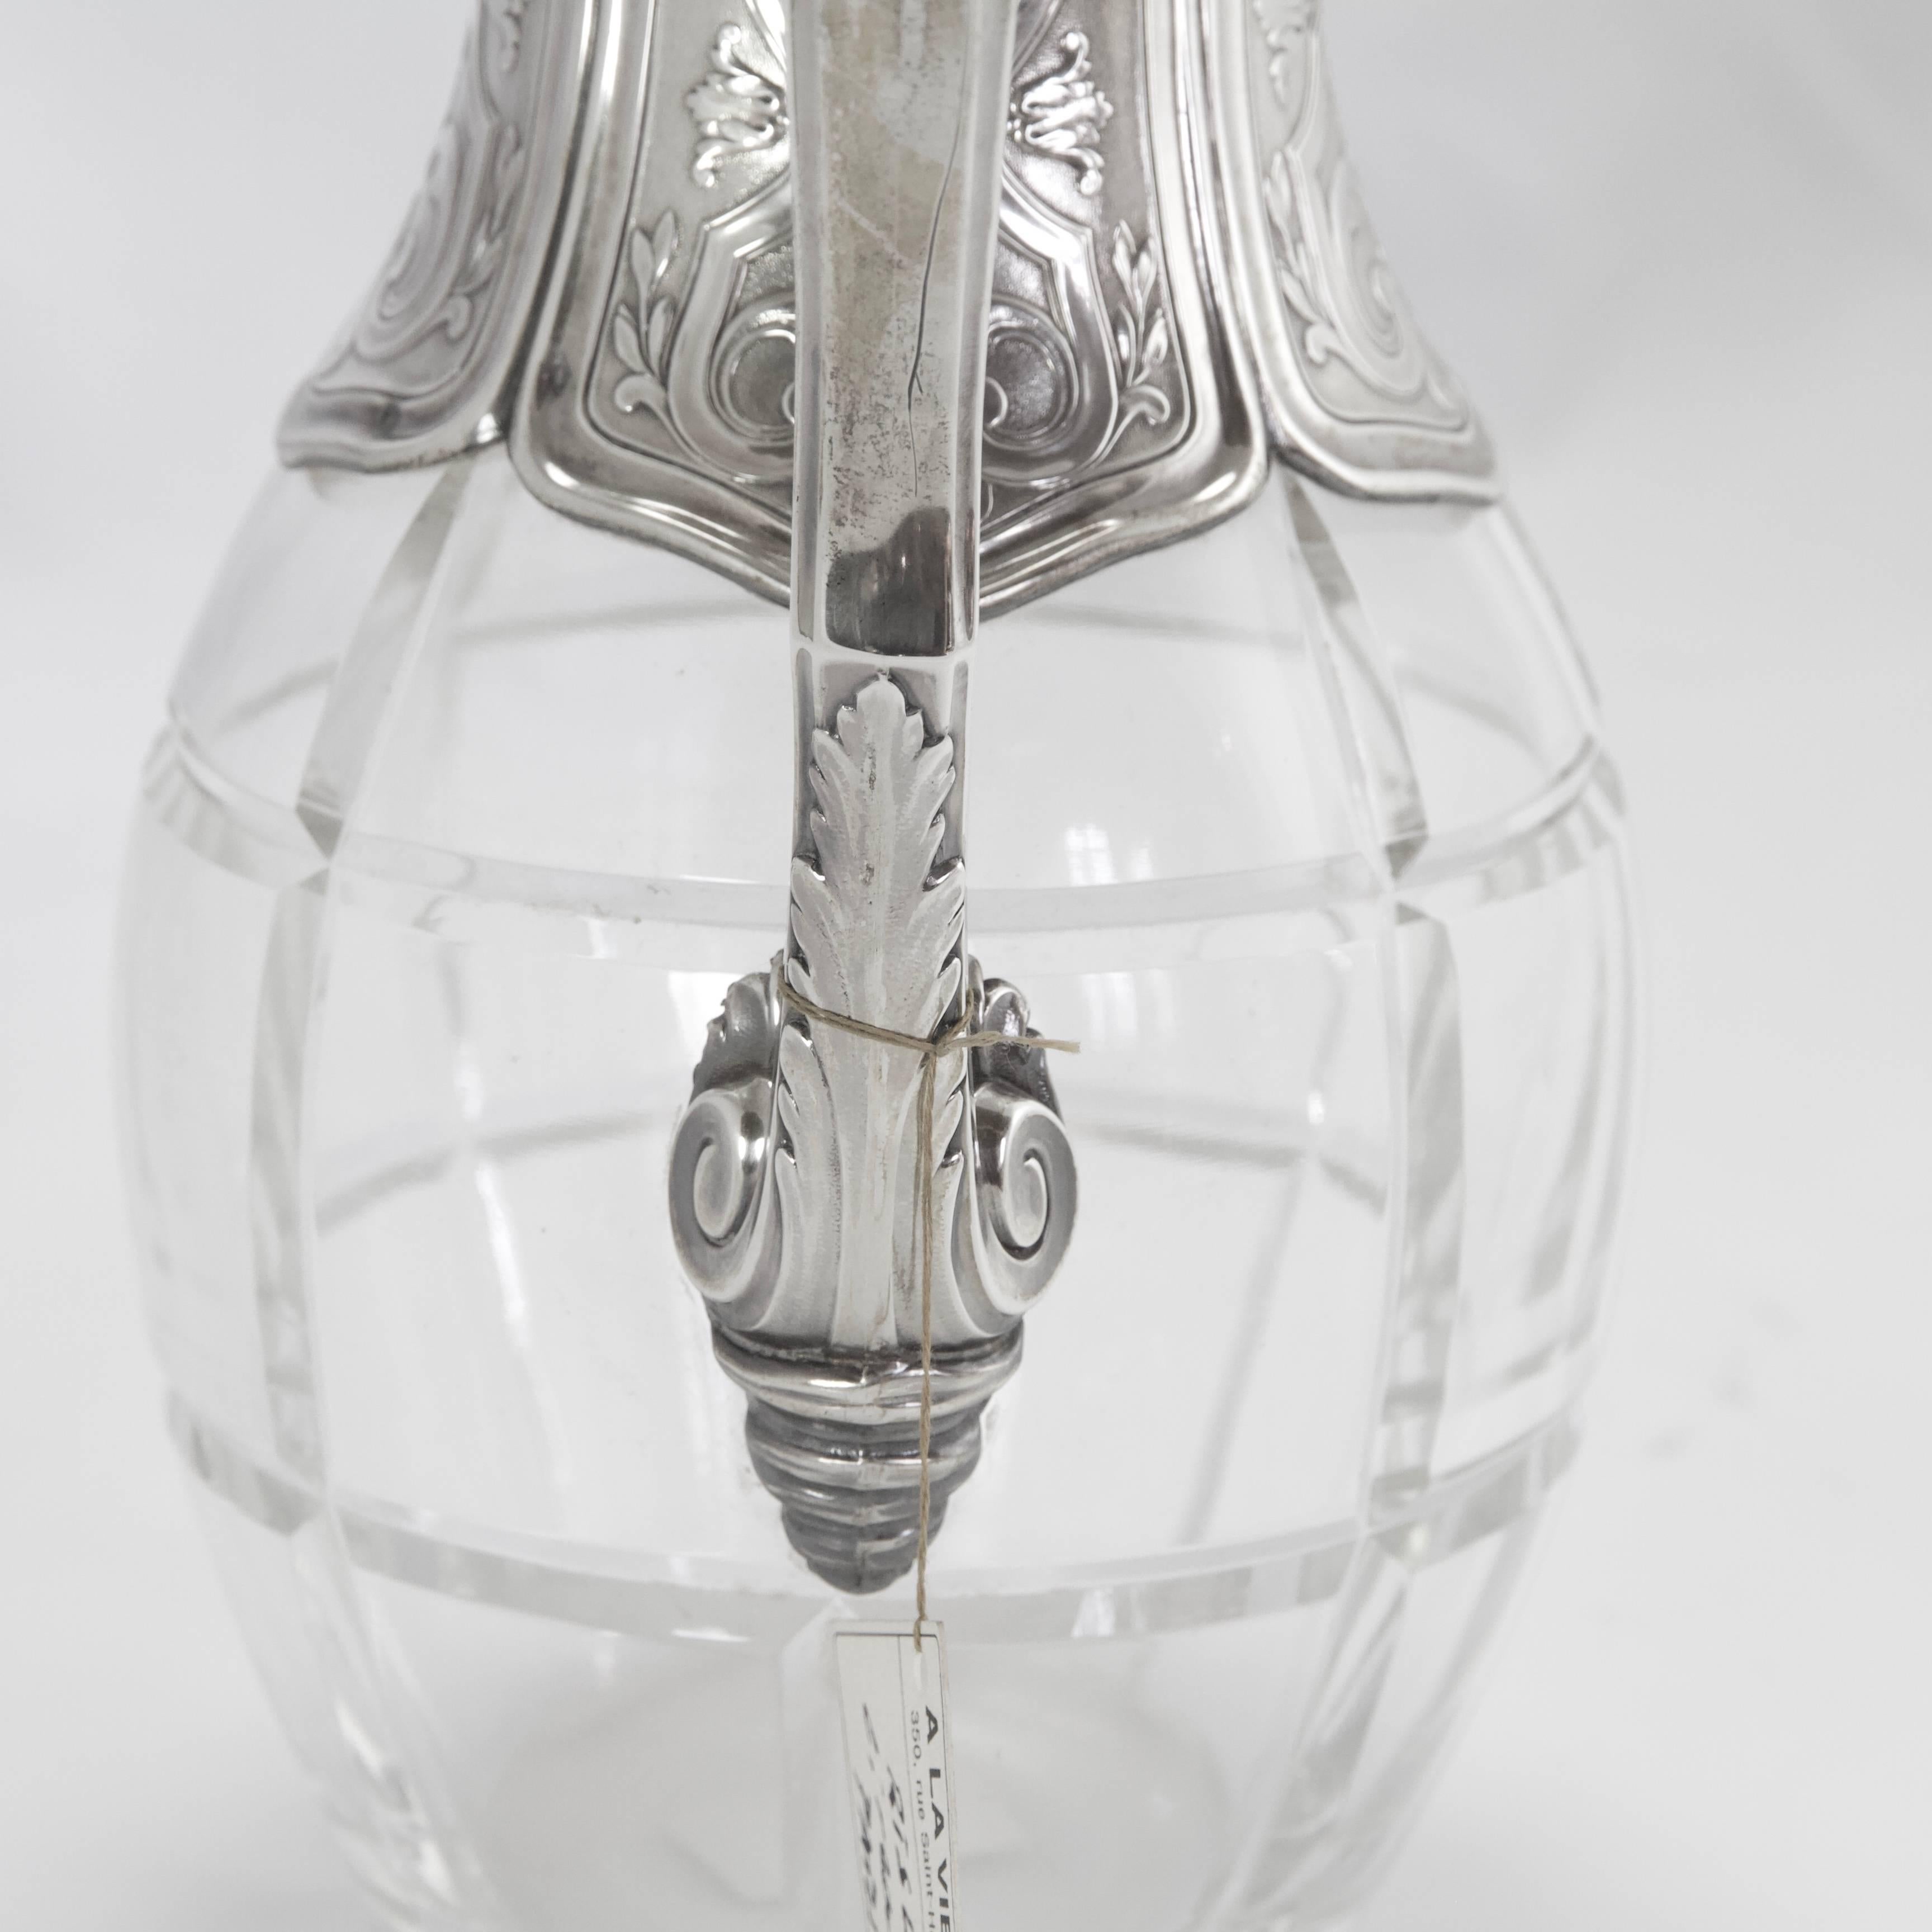 Carved crystal and top in sterling silver decorated with scroll and swirling pattern in taste of Regency style. Interior gilded.
Made by Risler, circa 1900. Maker's mark
French assays marks.
 